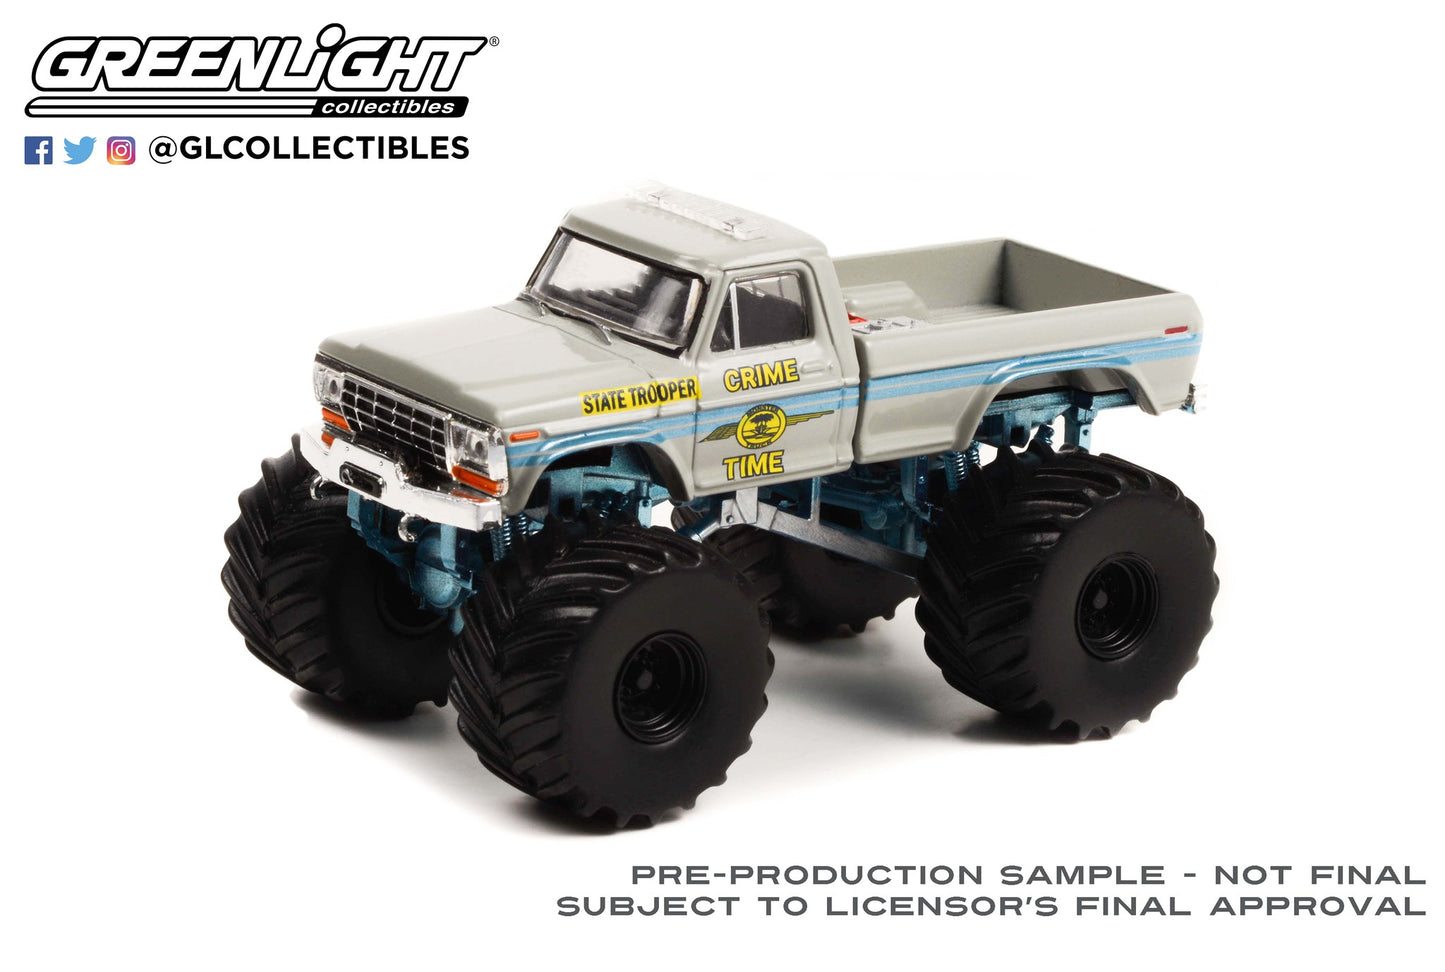 GreenLight 1:64 Kings of Crunch Series 11 - Crime Time State Trooper - 1979 Ford F-250 Monster Truck Solid Pack 49110-C